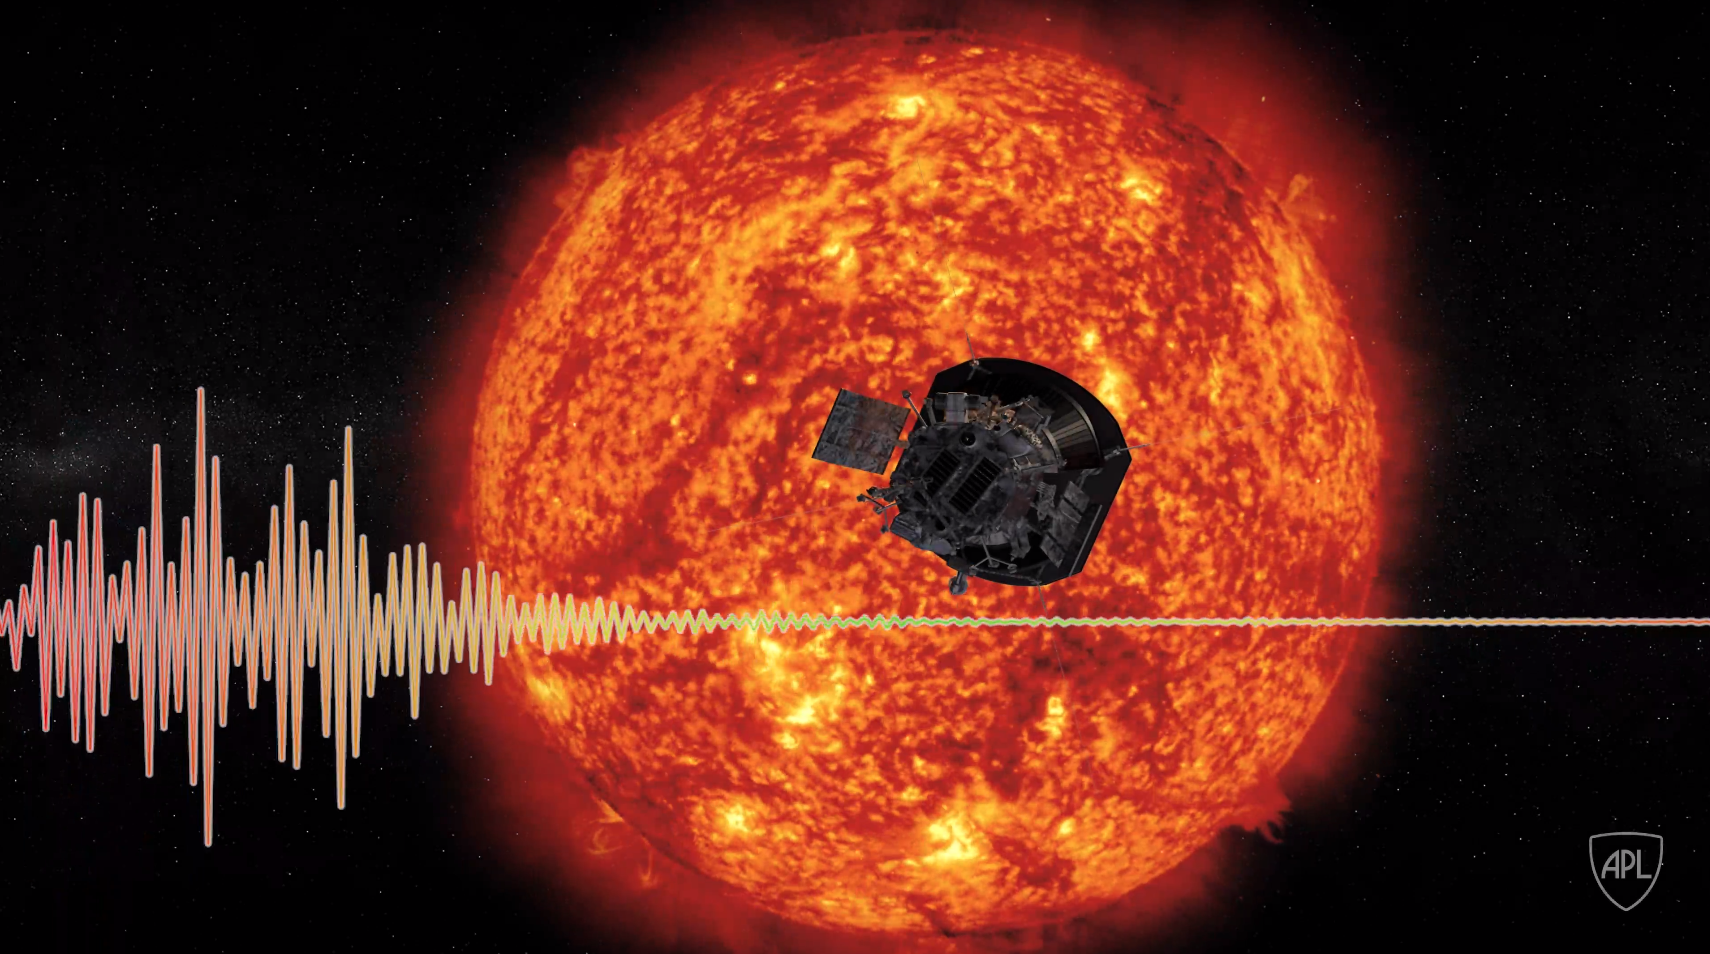 Parker Solar Probe’s FIELDS instrument can eavesdrop on the electric and magnetic fluctuations caused by plasma waves, and it can “hear” when the waves and particles interact with one another, recording frequency and amplitude information about these plasma waves that scientists can transform into sound files.